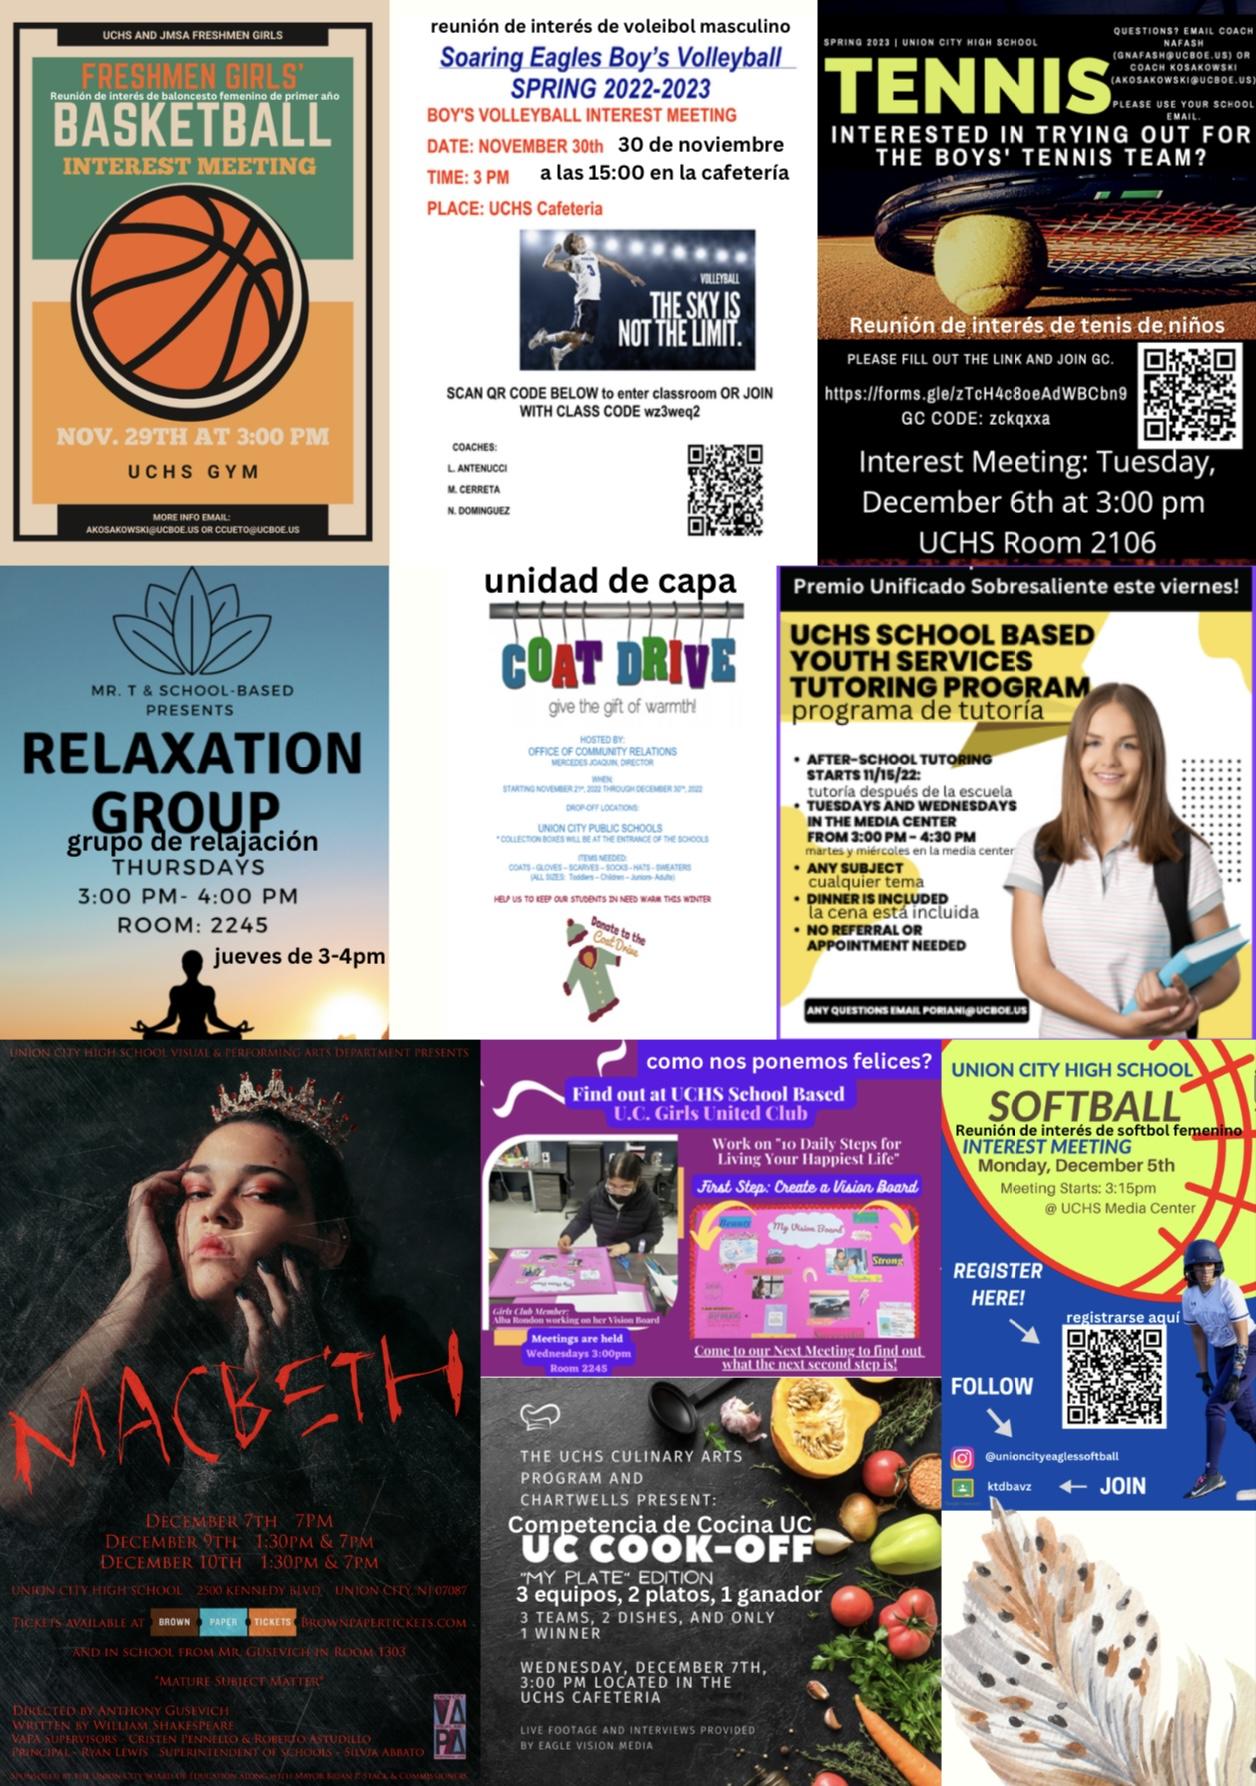 The UCHS Weekly-December 2, 2022-Spanish-Page 2